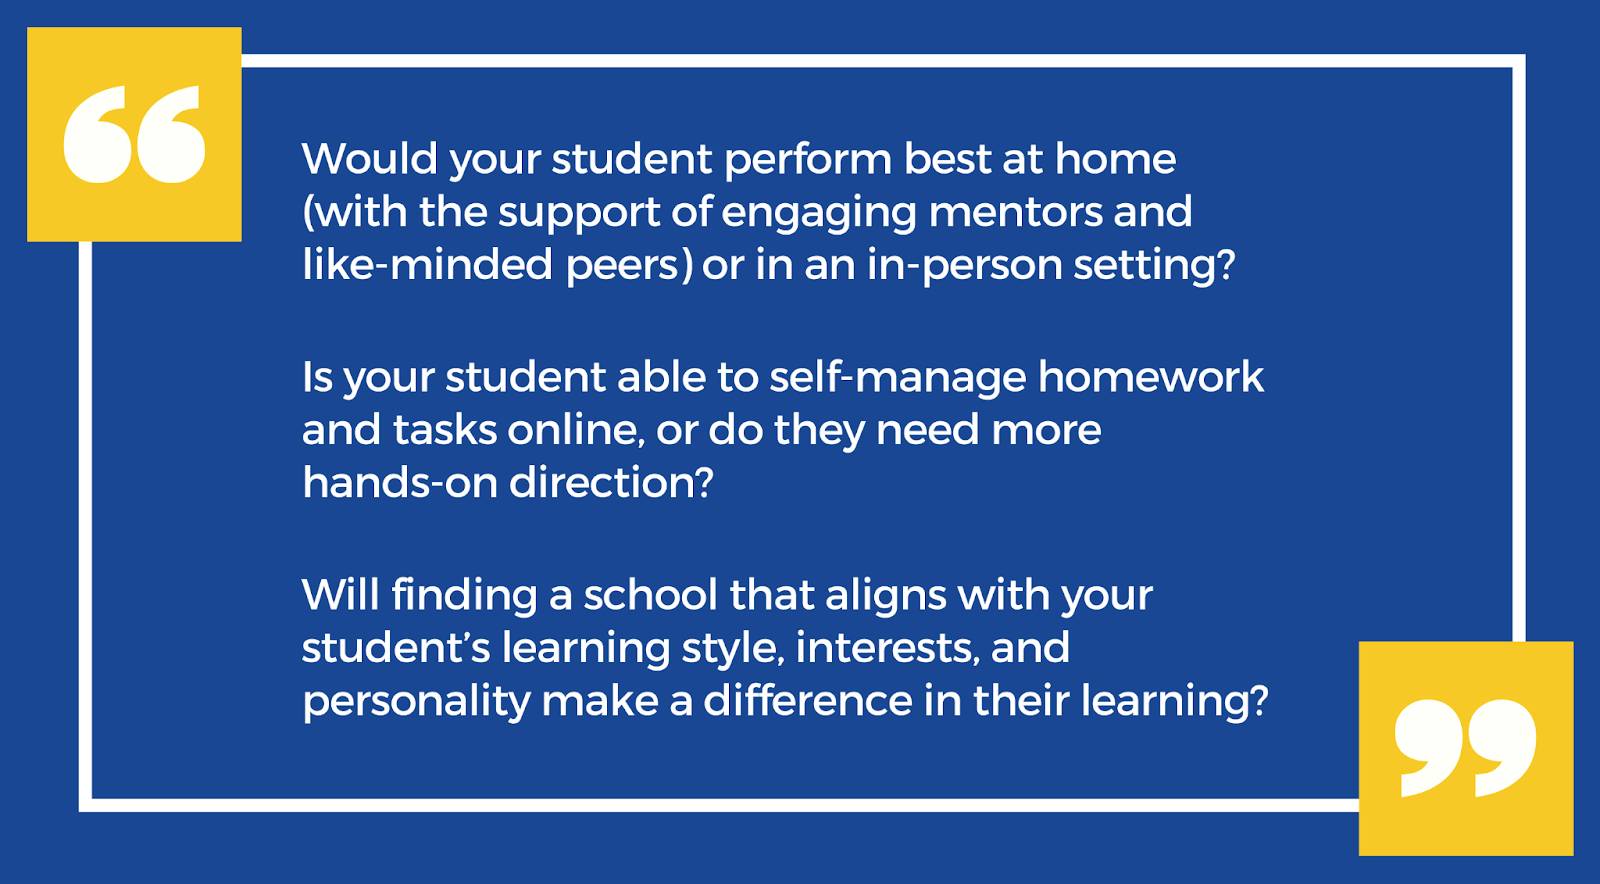 Three questions to evaluate your student's educational experience: Would your student perform best at home, or in an in-person setting? Is your student able to self-manage homework and tasks online, or do they need more hands-on direction? Will finding a school that aligns with your student's learning style, interests, and personality make a difference in their learning?